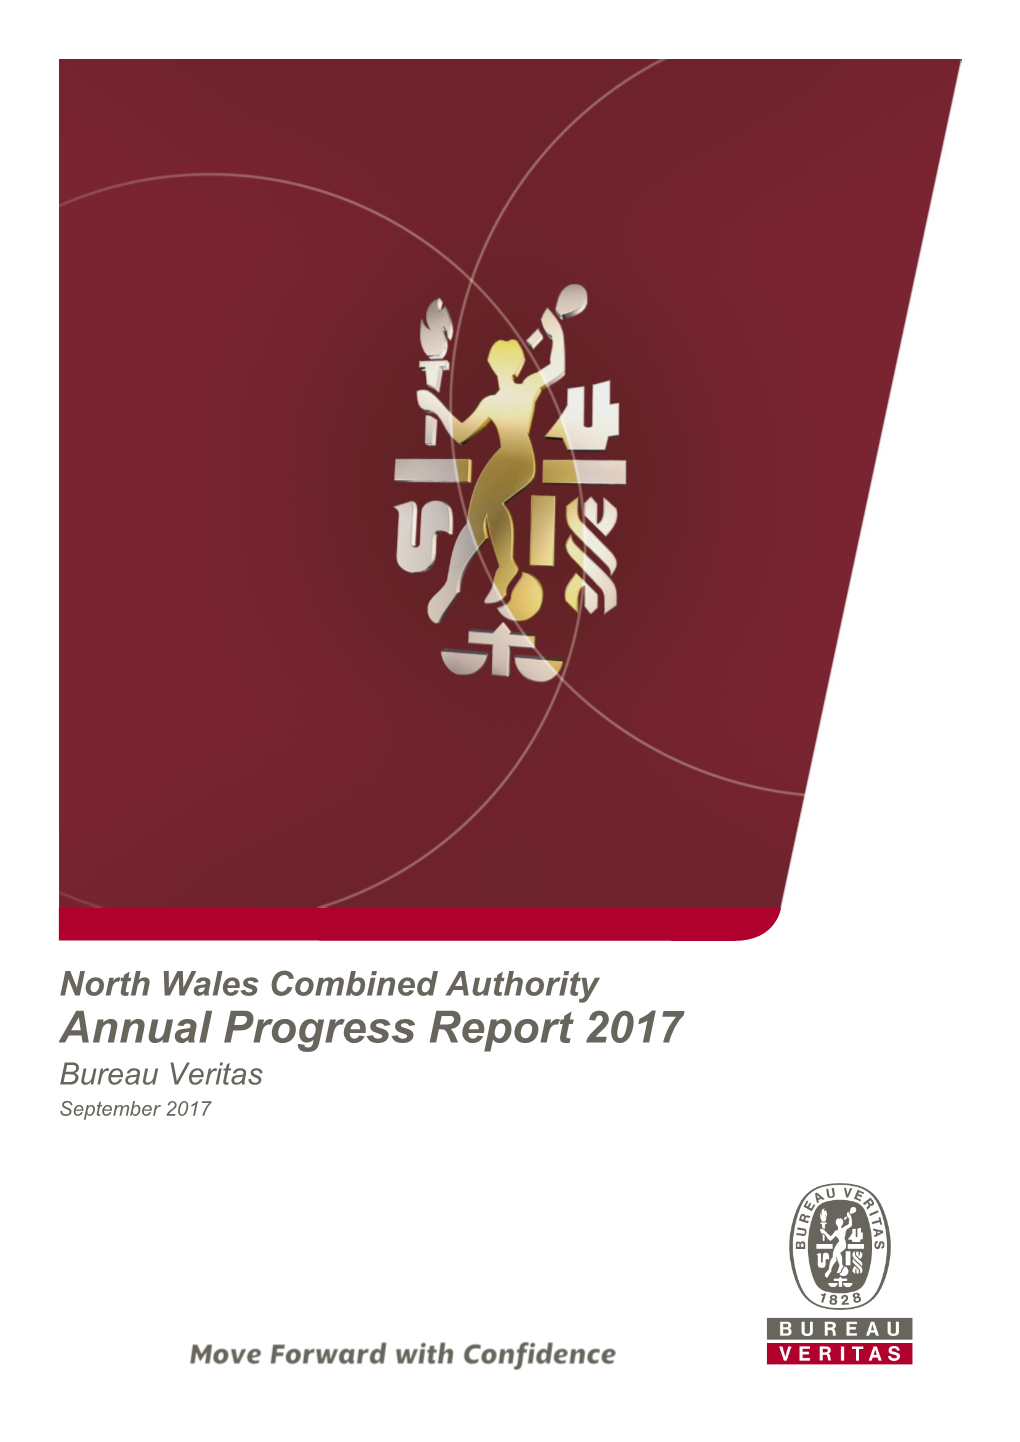 North Wales Combined Authority Air Quality Progress Report 2017